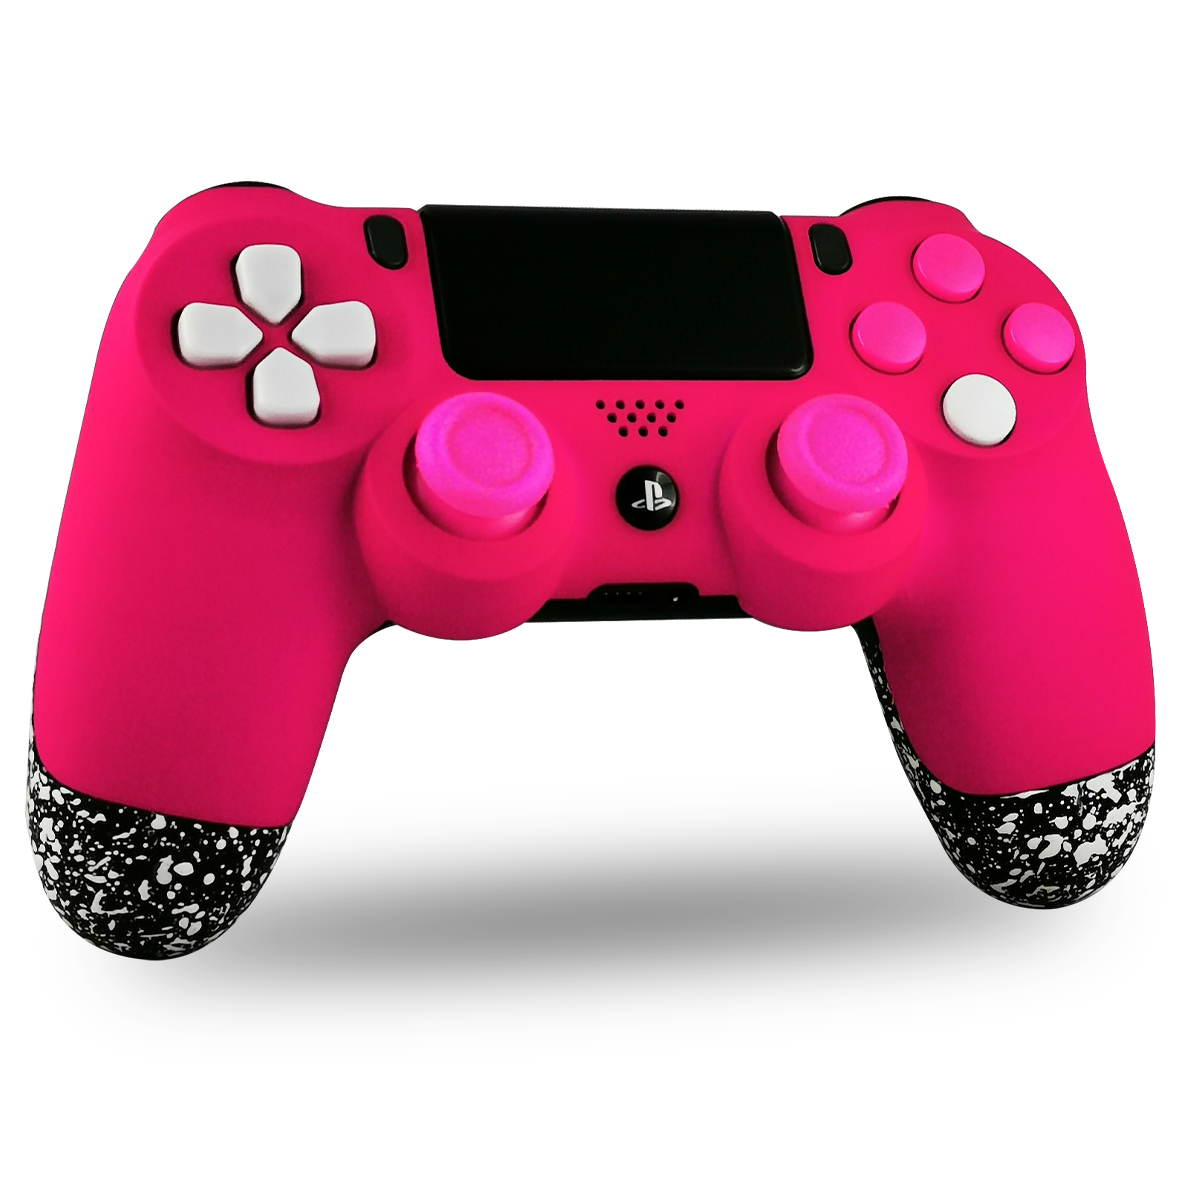 manette-PS4-custom-playstation-4-sony-personnalisee-drawmypad-pink-is-the-new-black